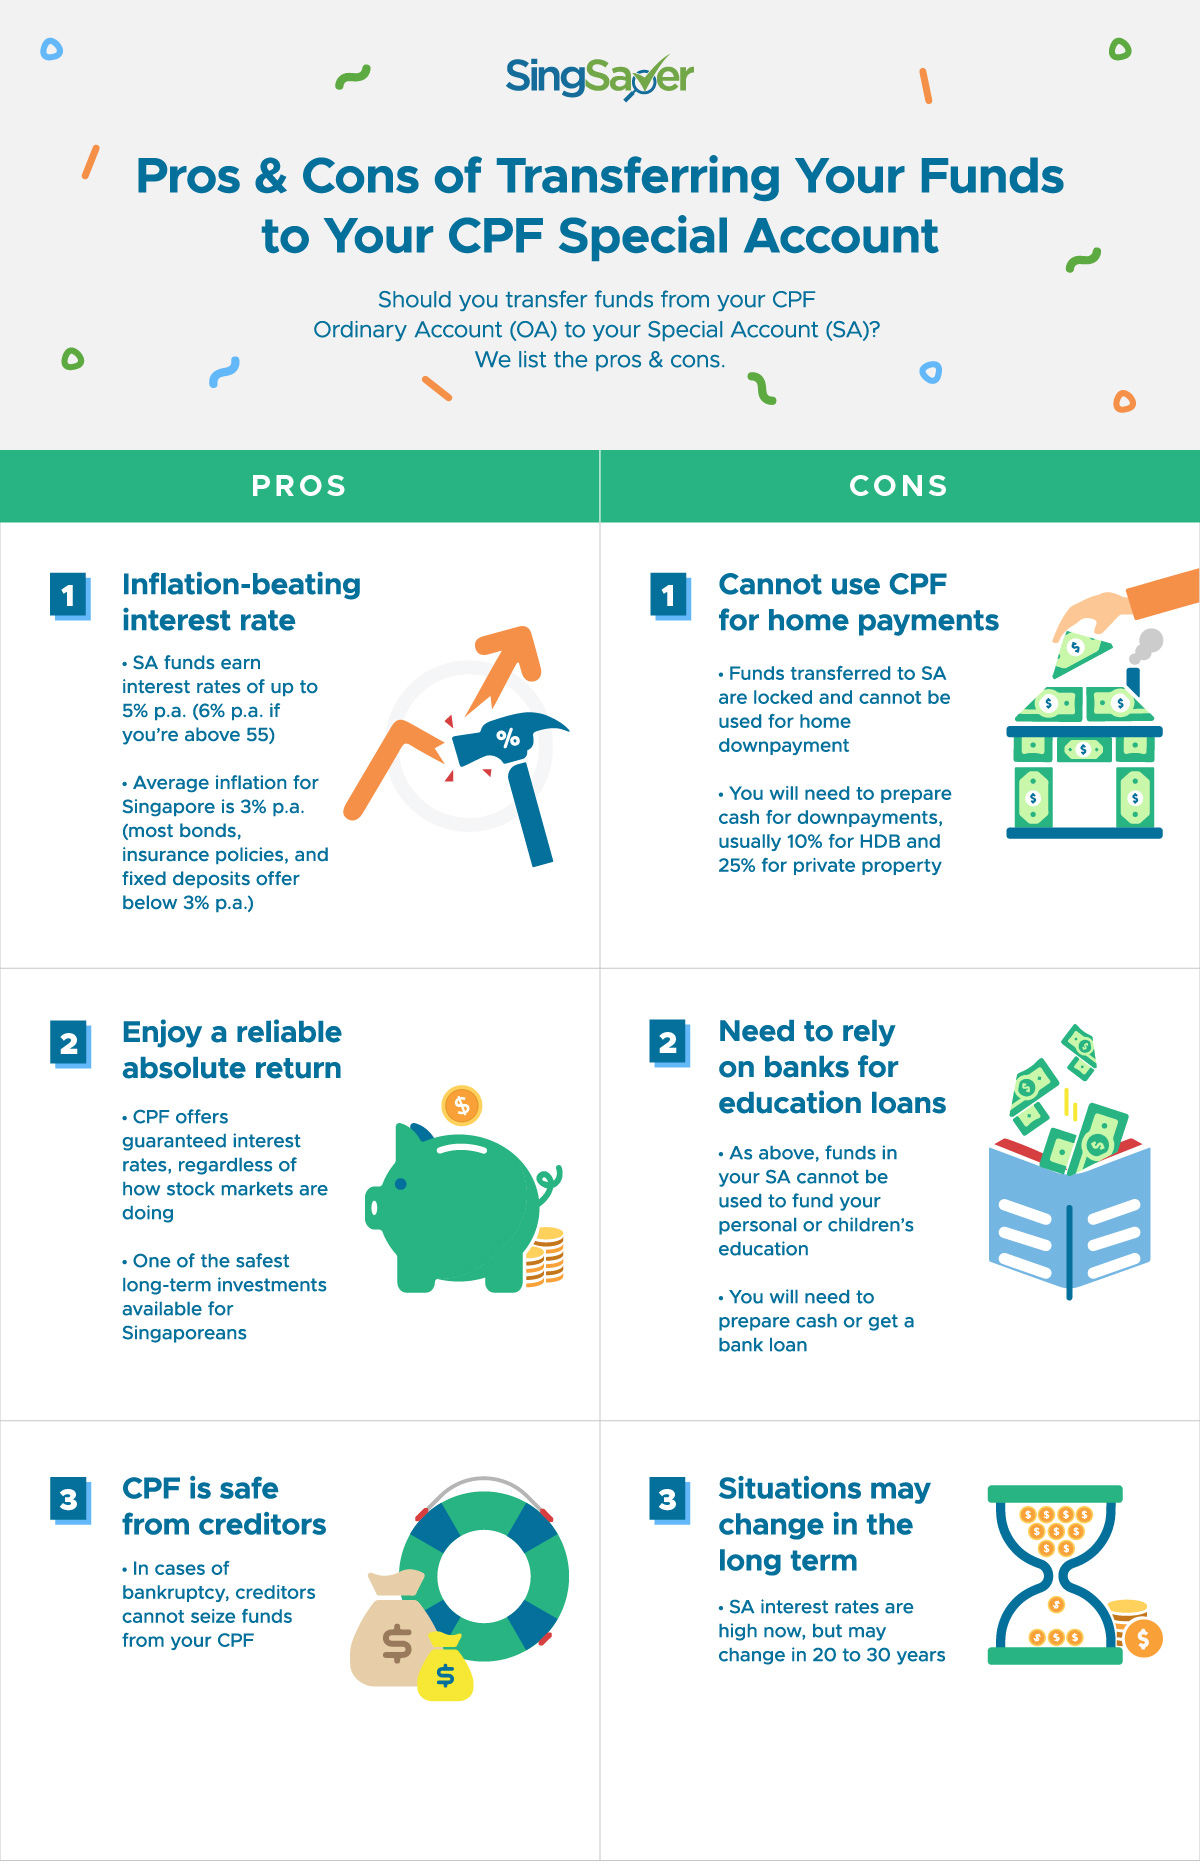 Pros and cons of keeping your savings in your CPF Special Account